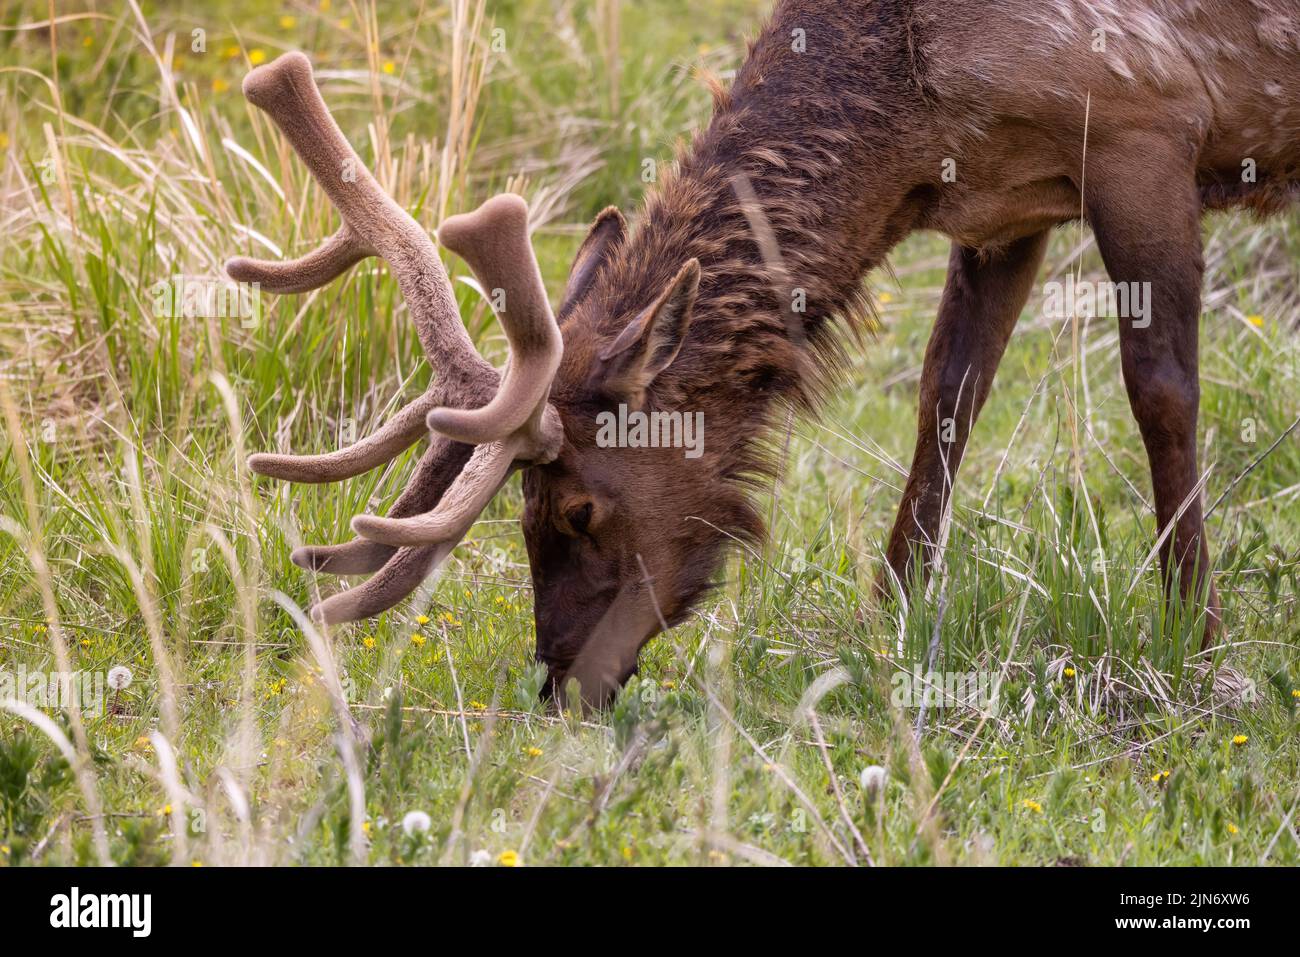 Elk eating grass near Forest in American Landscape. Stock Photo